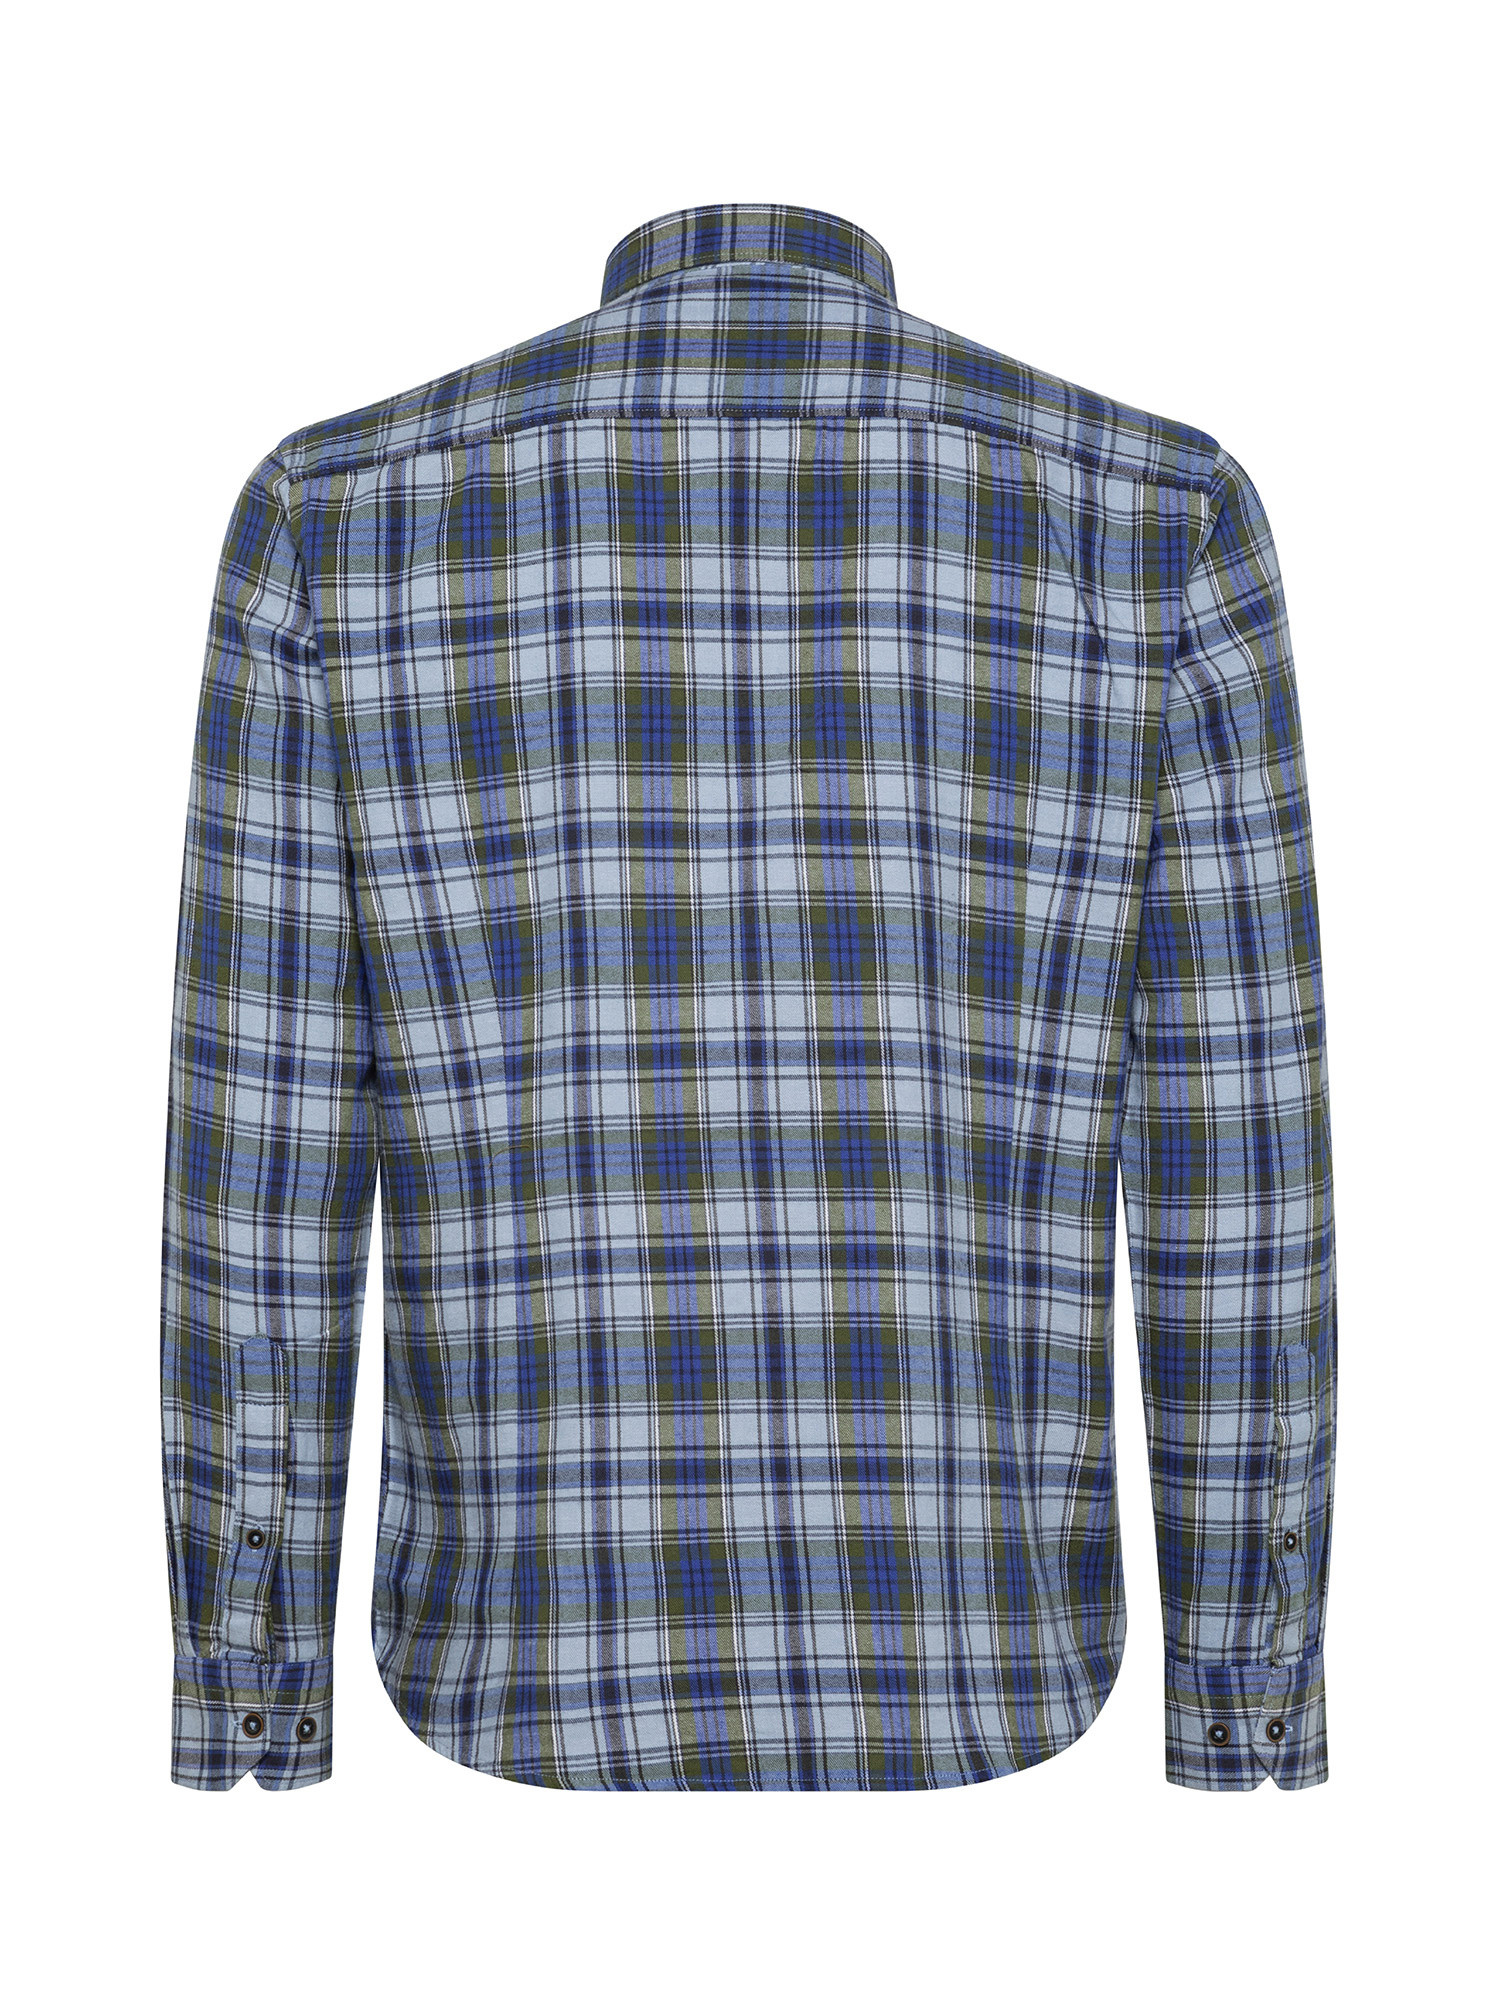 JCT - Checked shirt in soft flannel, Green, large image number 1